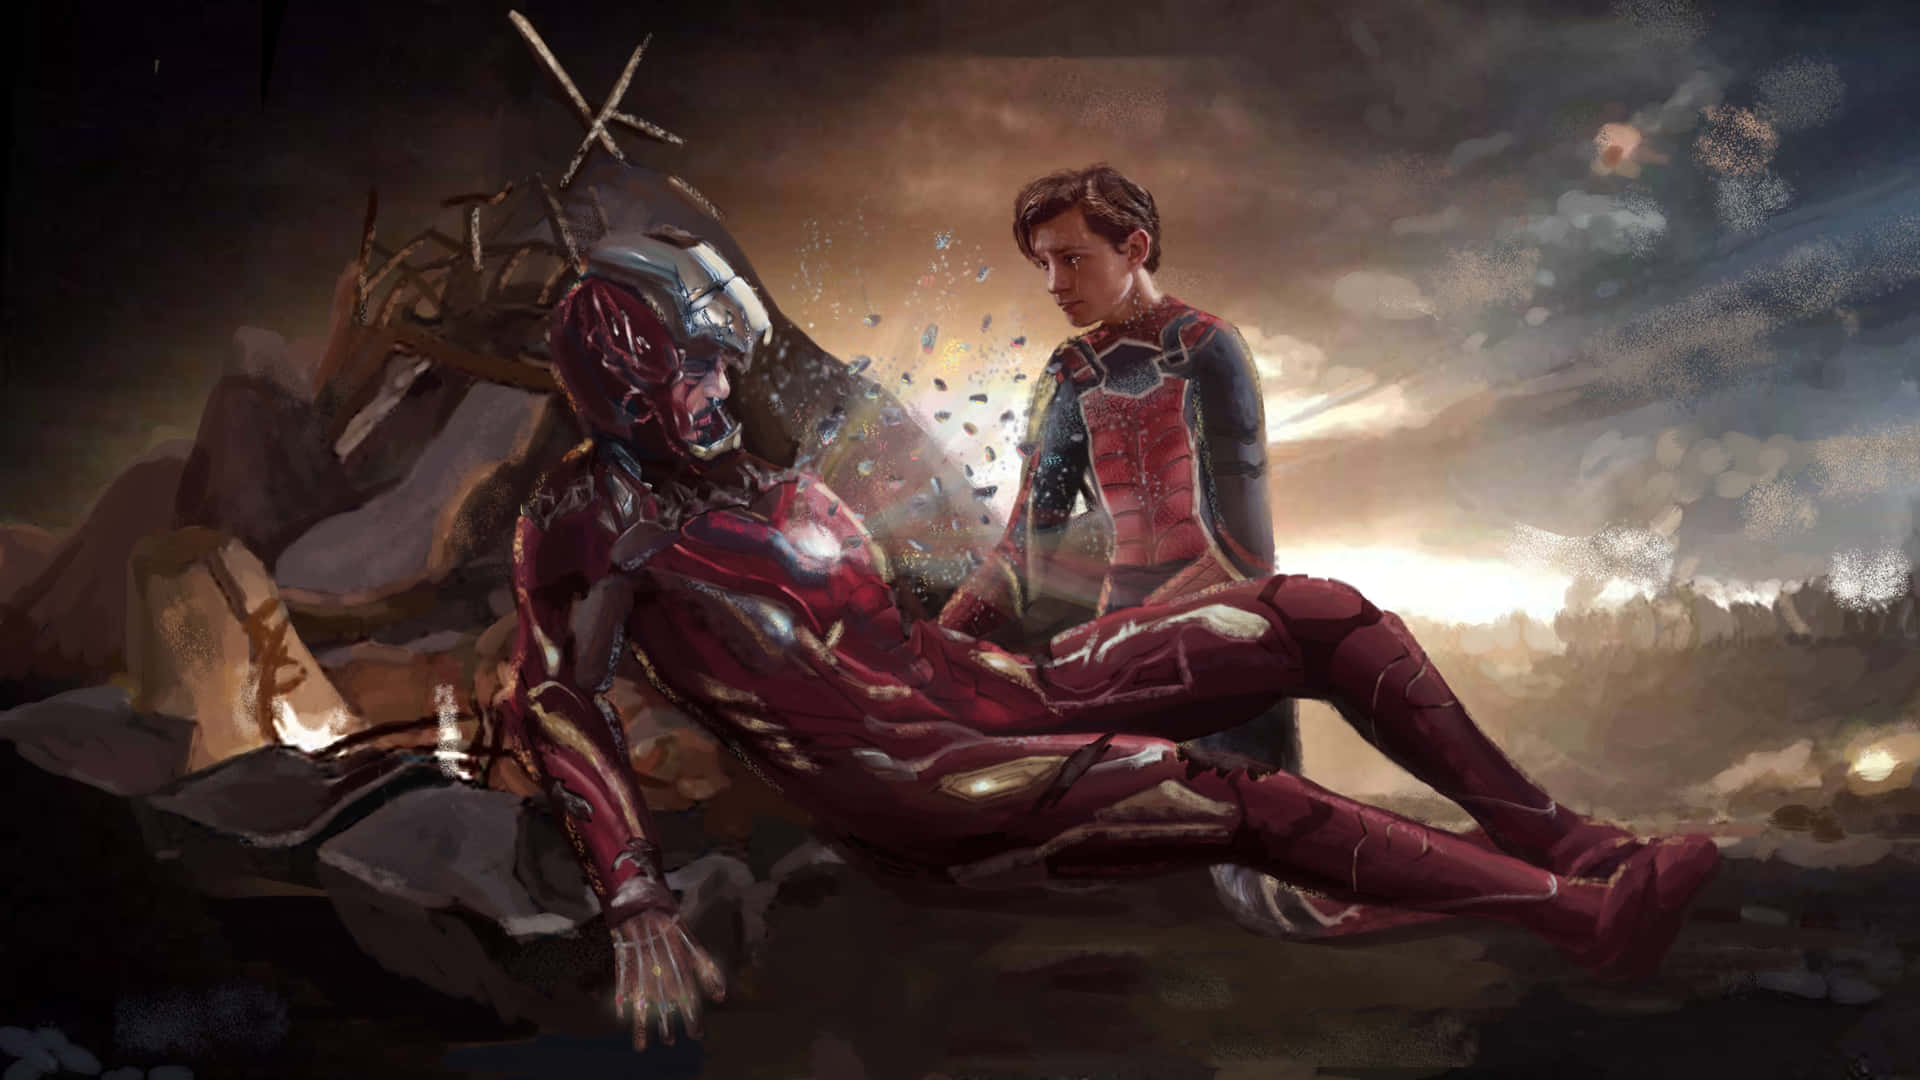 Spider Man and Iron Man join forces to protect the citizens of New York! Wallpaper